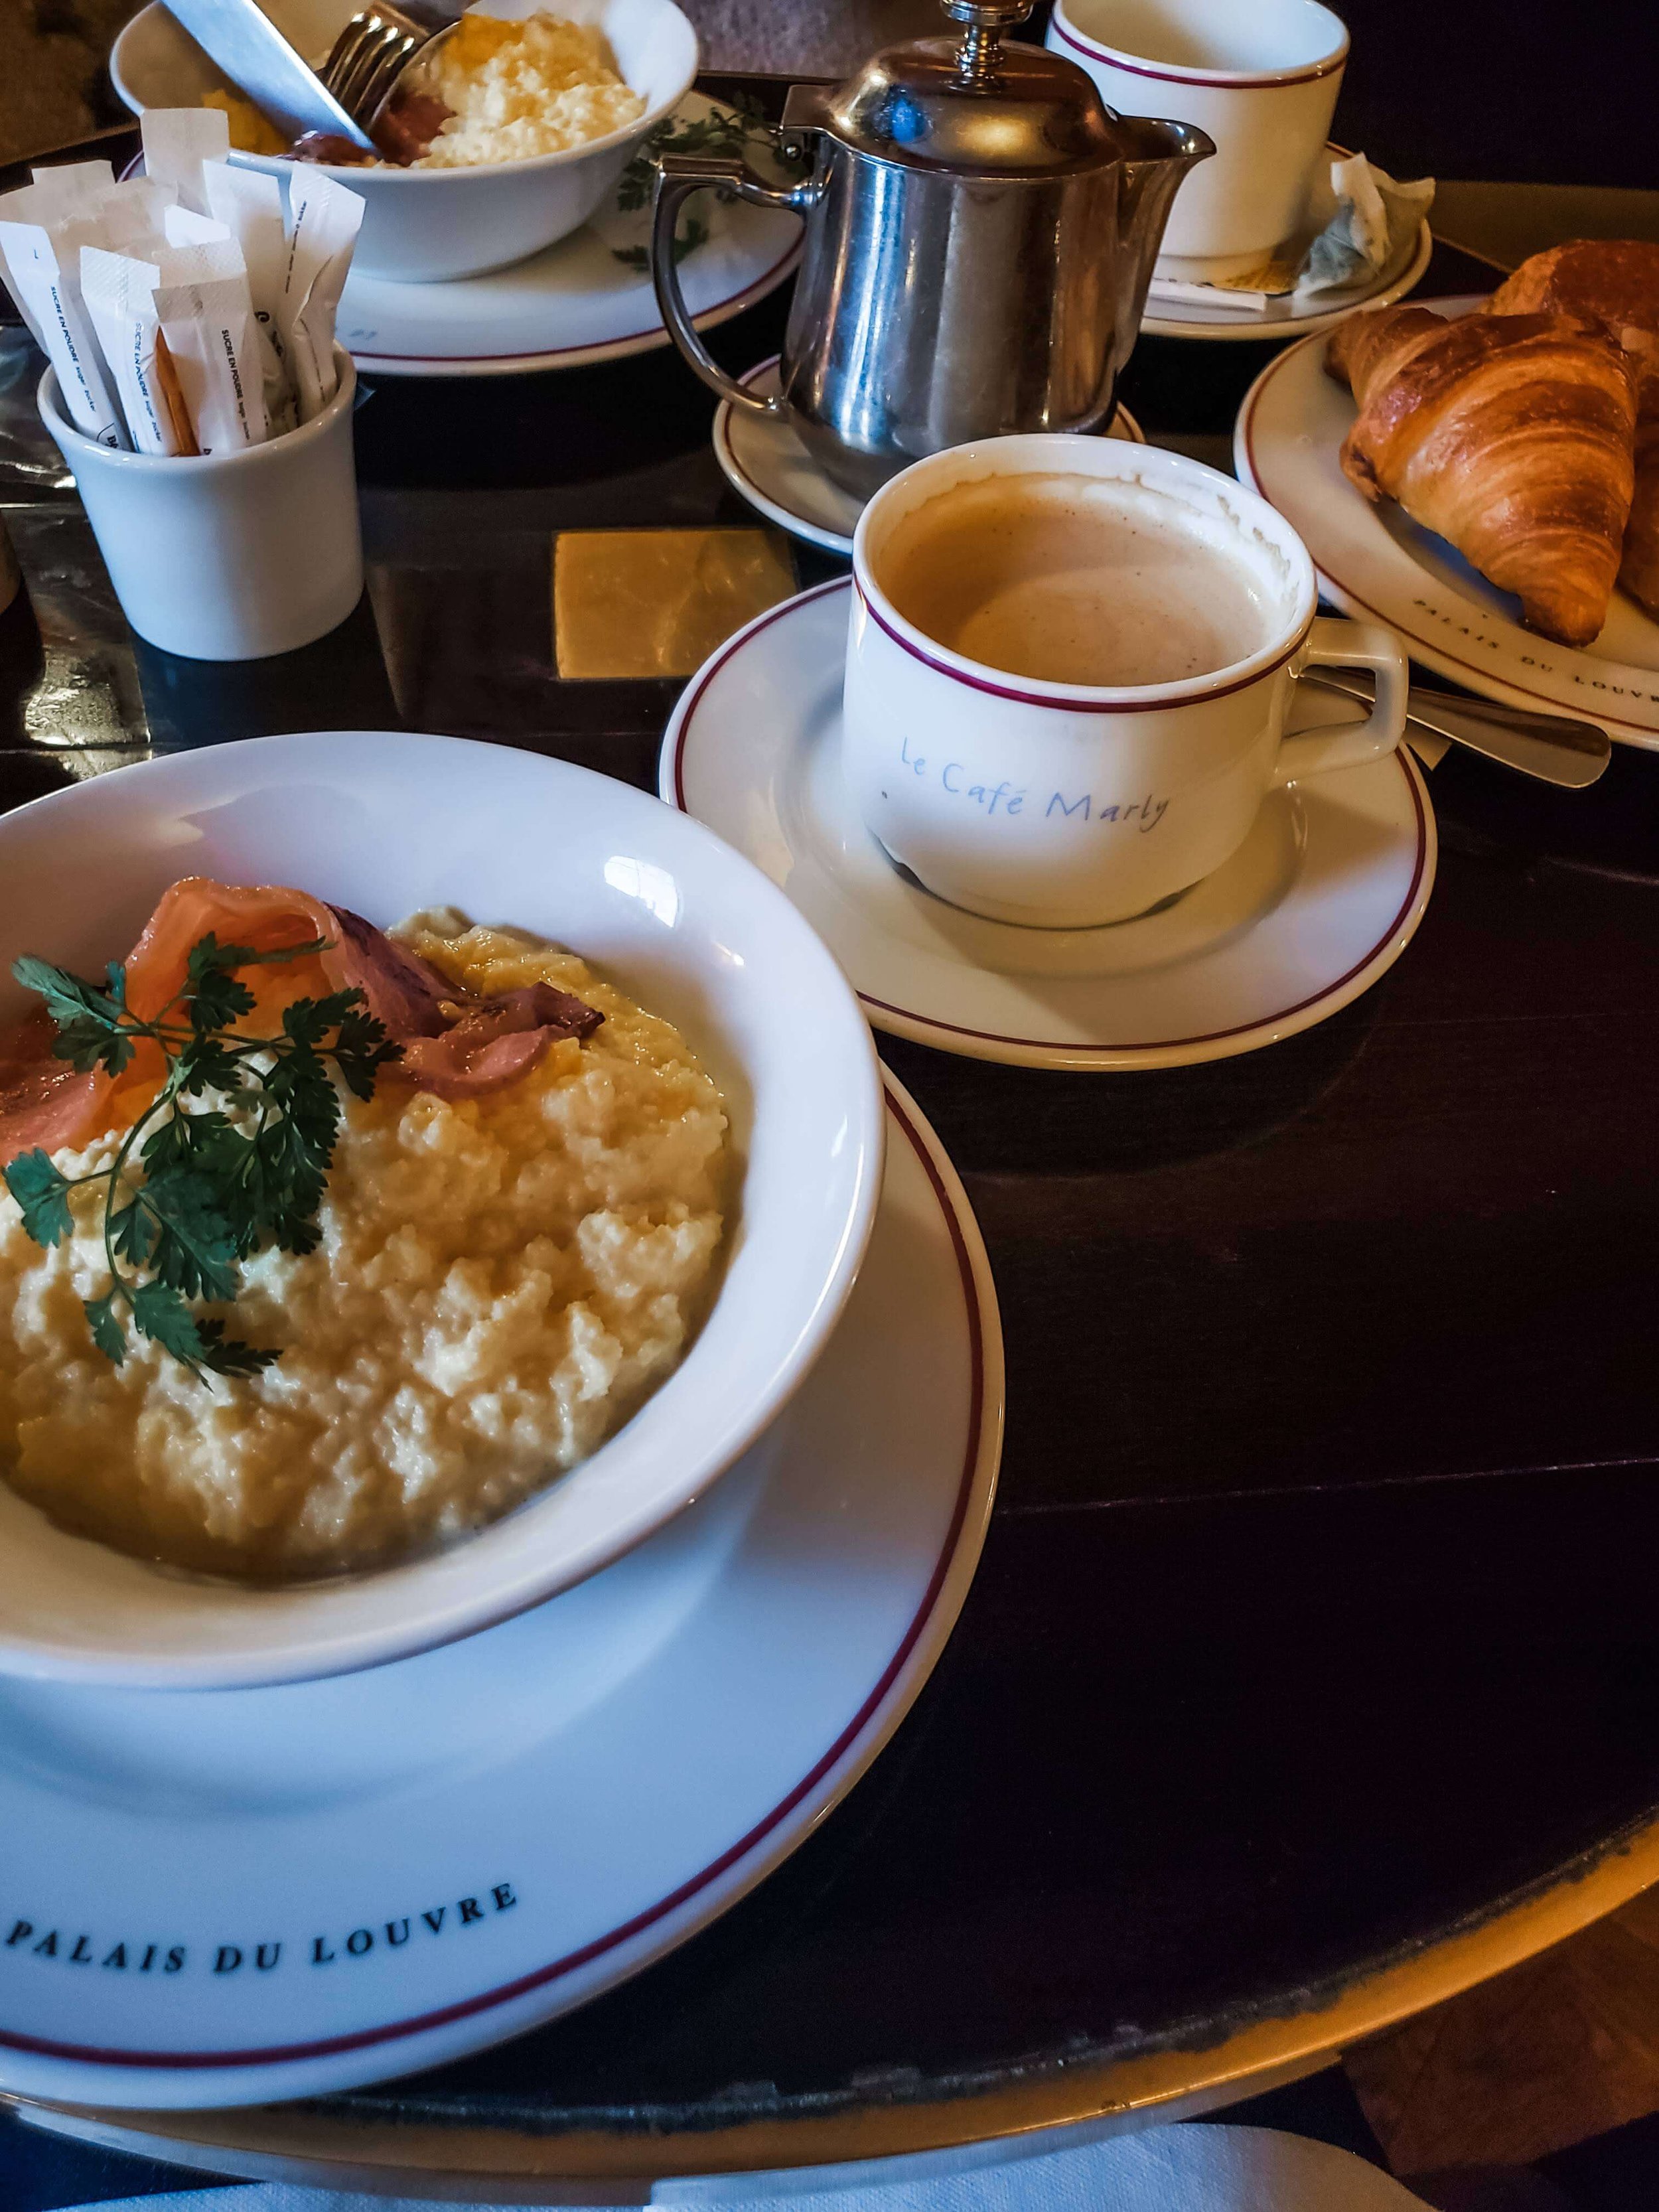 Breakfast at Cafe Marly in Paris